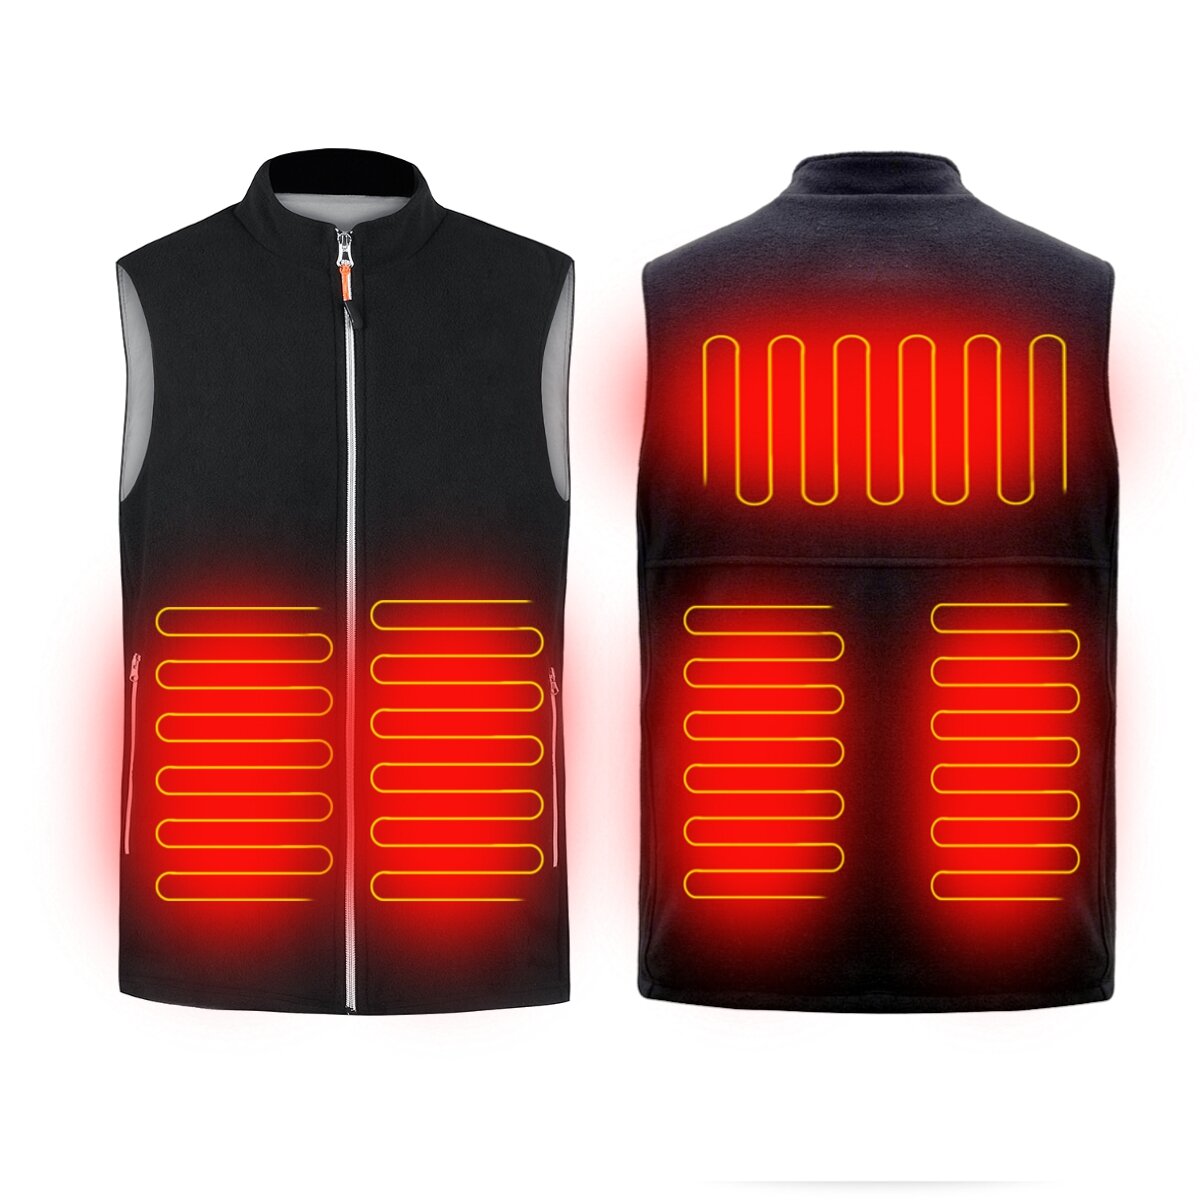 45-55℃ Electric Heated Vest USB Infrared Heating Jacket Winter Outdoor Thermal Clothing Waistcoat Warmer